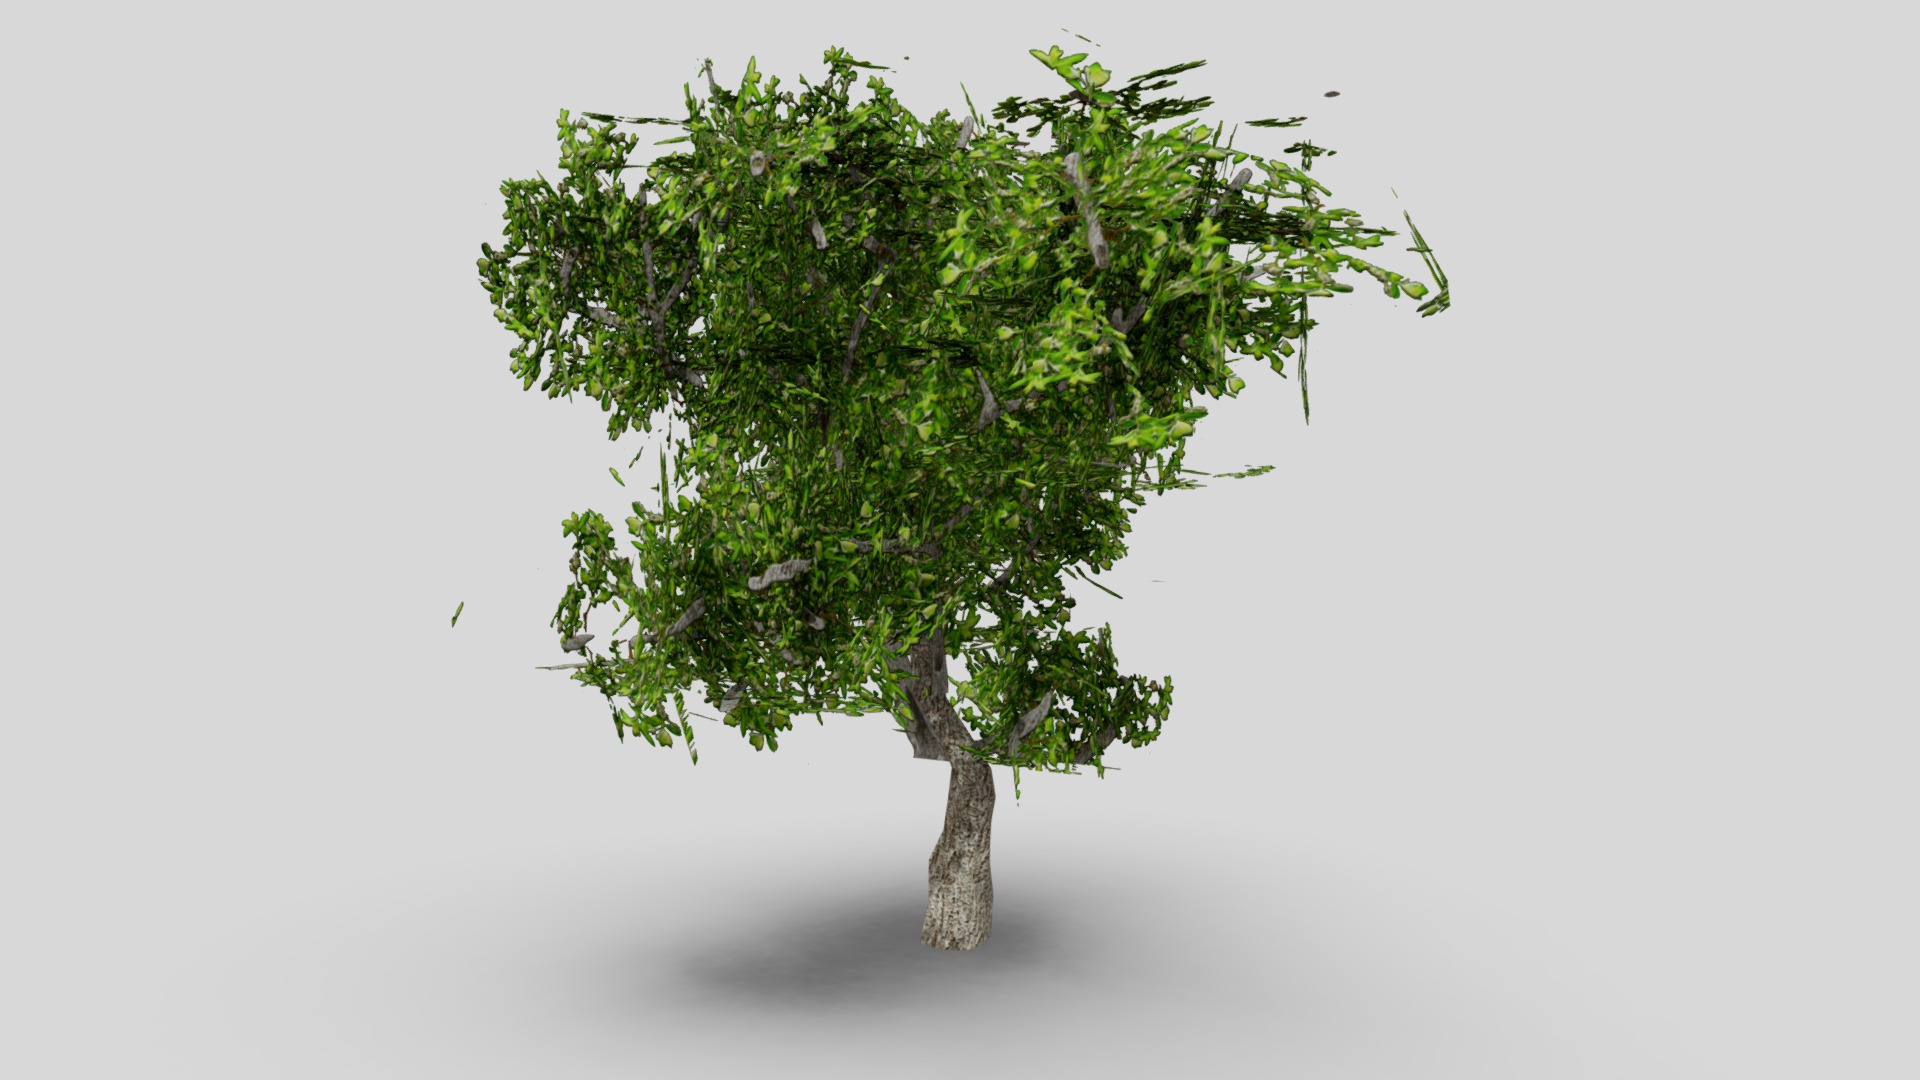 3D model Lowpoly 3D Tree (107 faces) - This is a 3D model of the Lowpoly 3D Tree (107 faces). The 3D model is about a tree with green leaves.